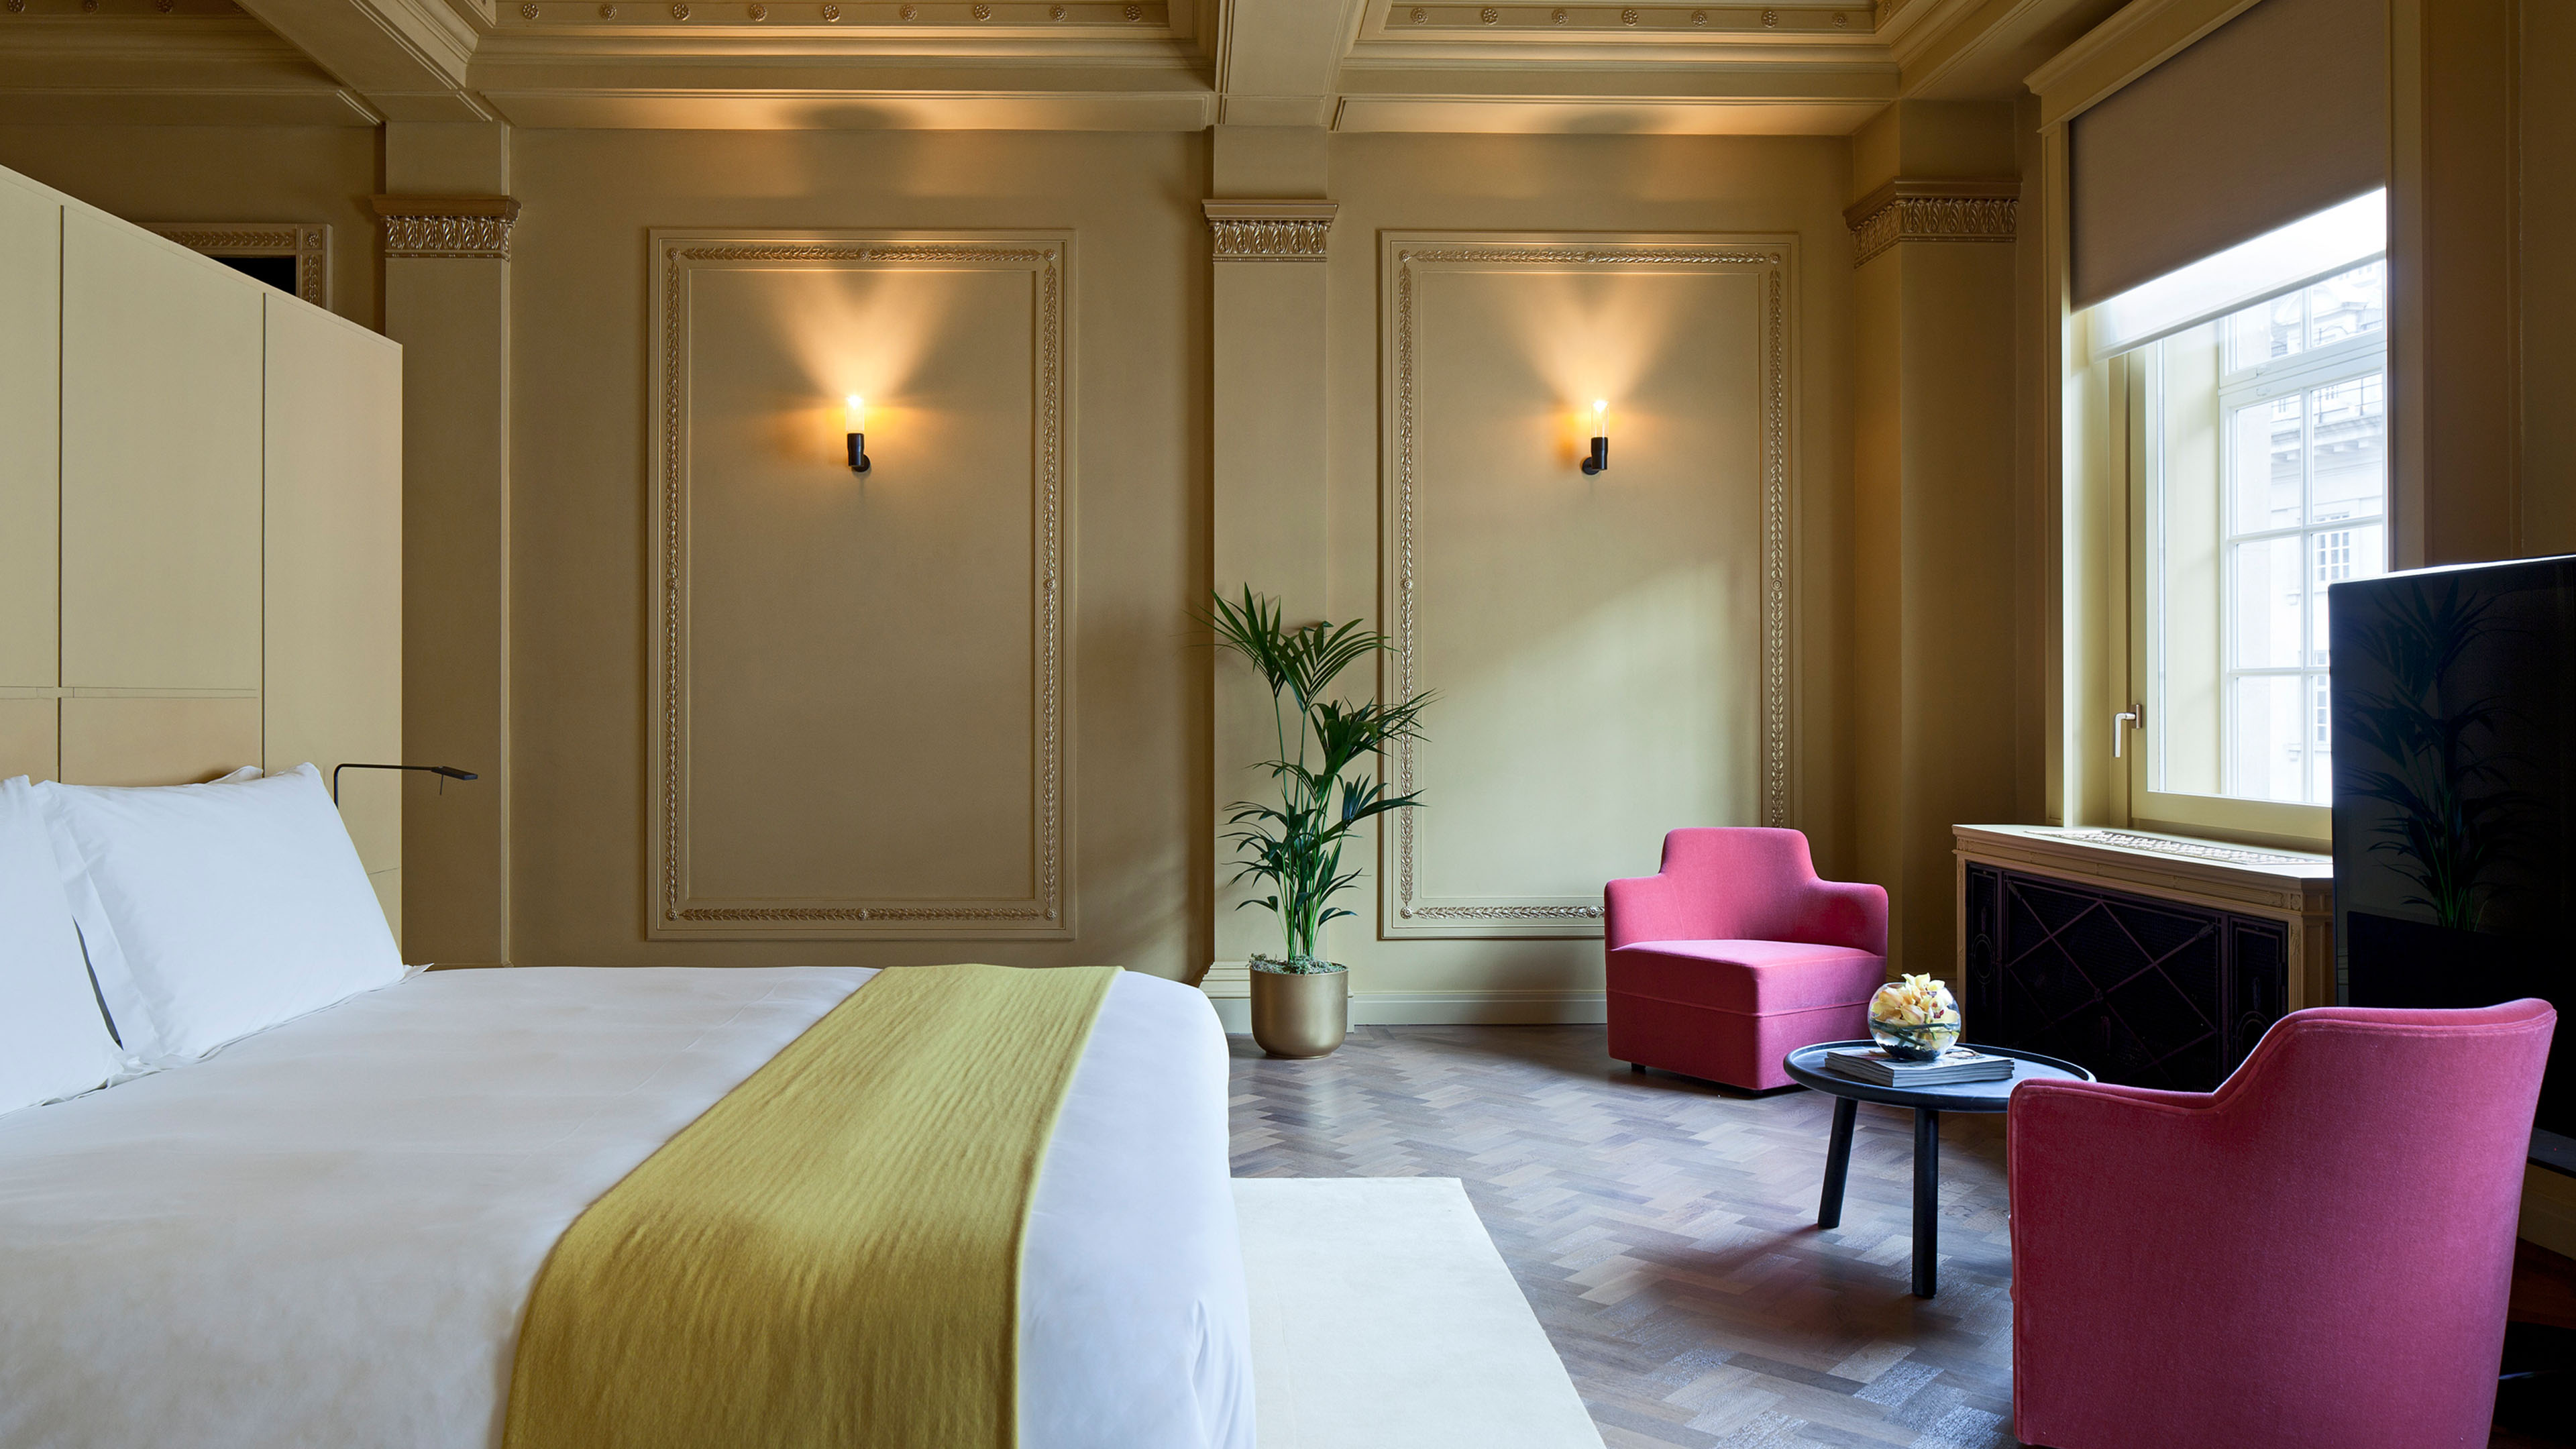 Hotel Cafe Royal London by David Chipperfield Architects